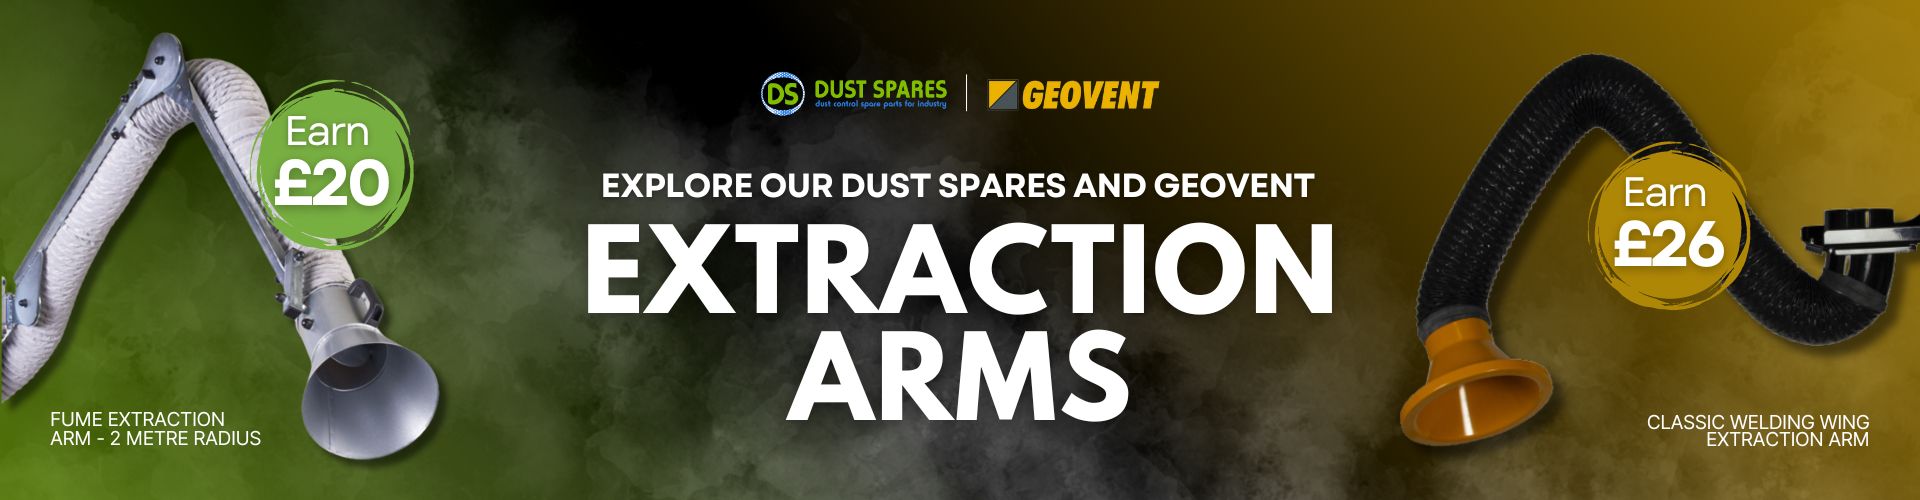 Extraction Arms